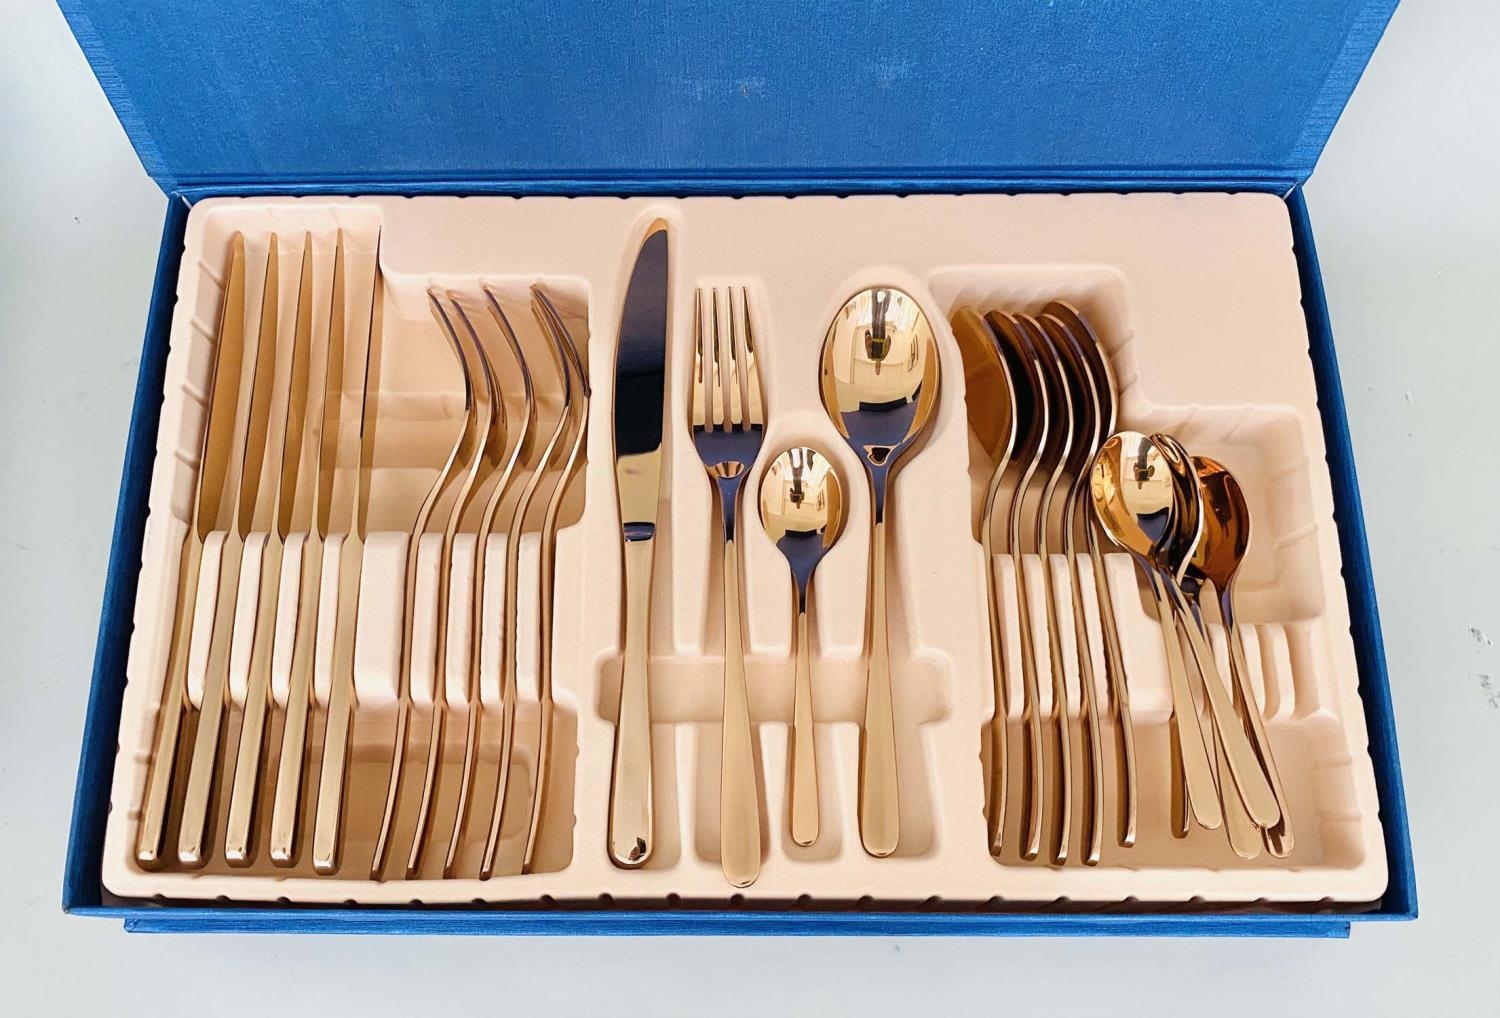 CANTEENS OF CUTLERY, a pair, each with 24 pieces, boxed, 42cm x 26.5cm x 5.5cm. (2) - Image 3 of 3